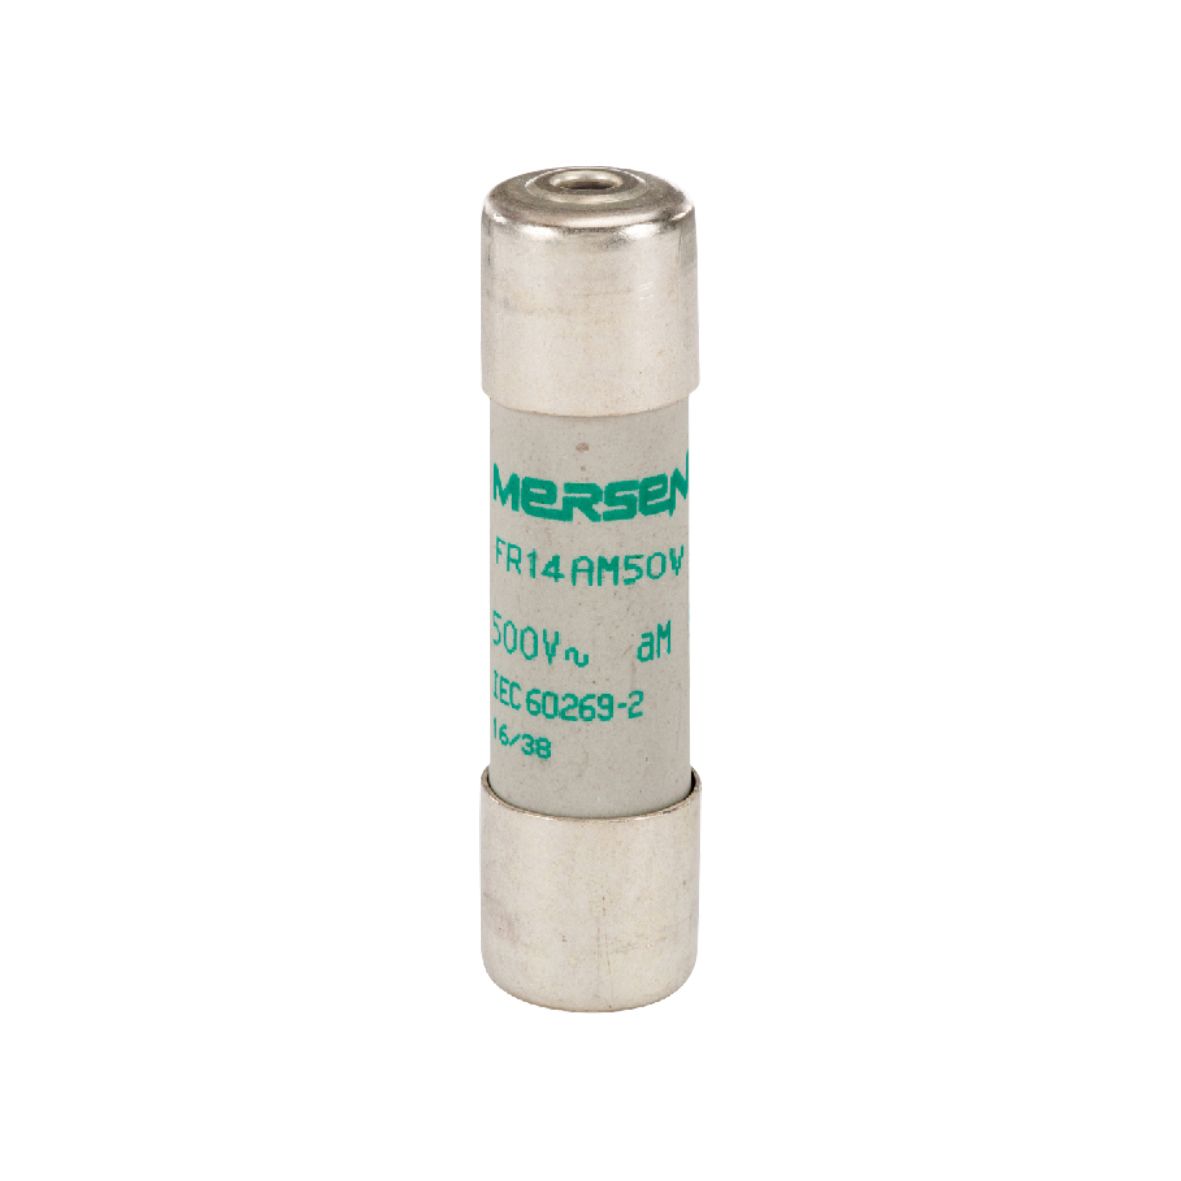 C216662 - Cylindrical fuse-link aM 500VAC 14.3x51, 45A with striker